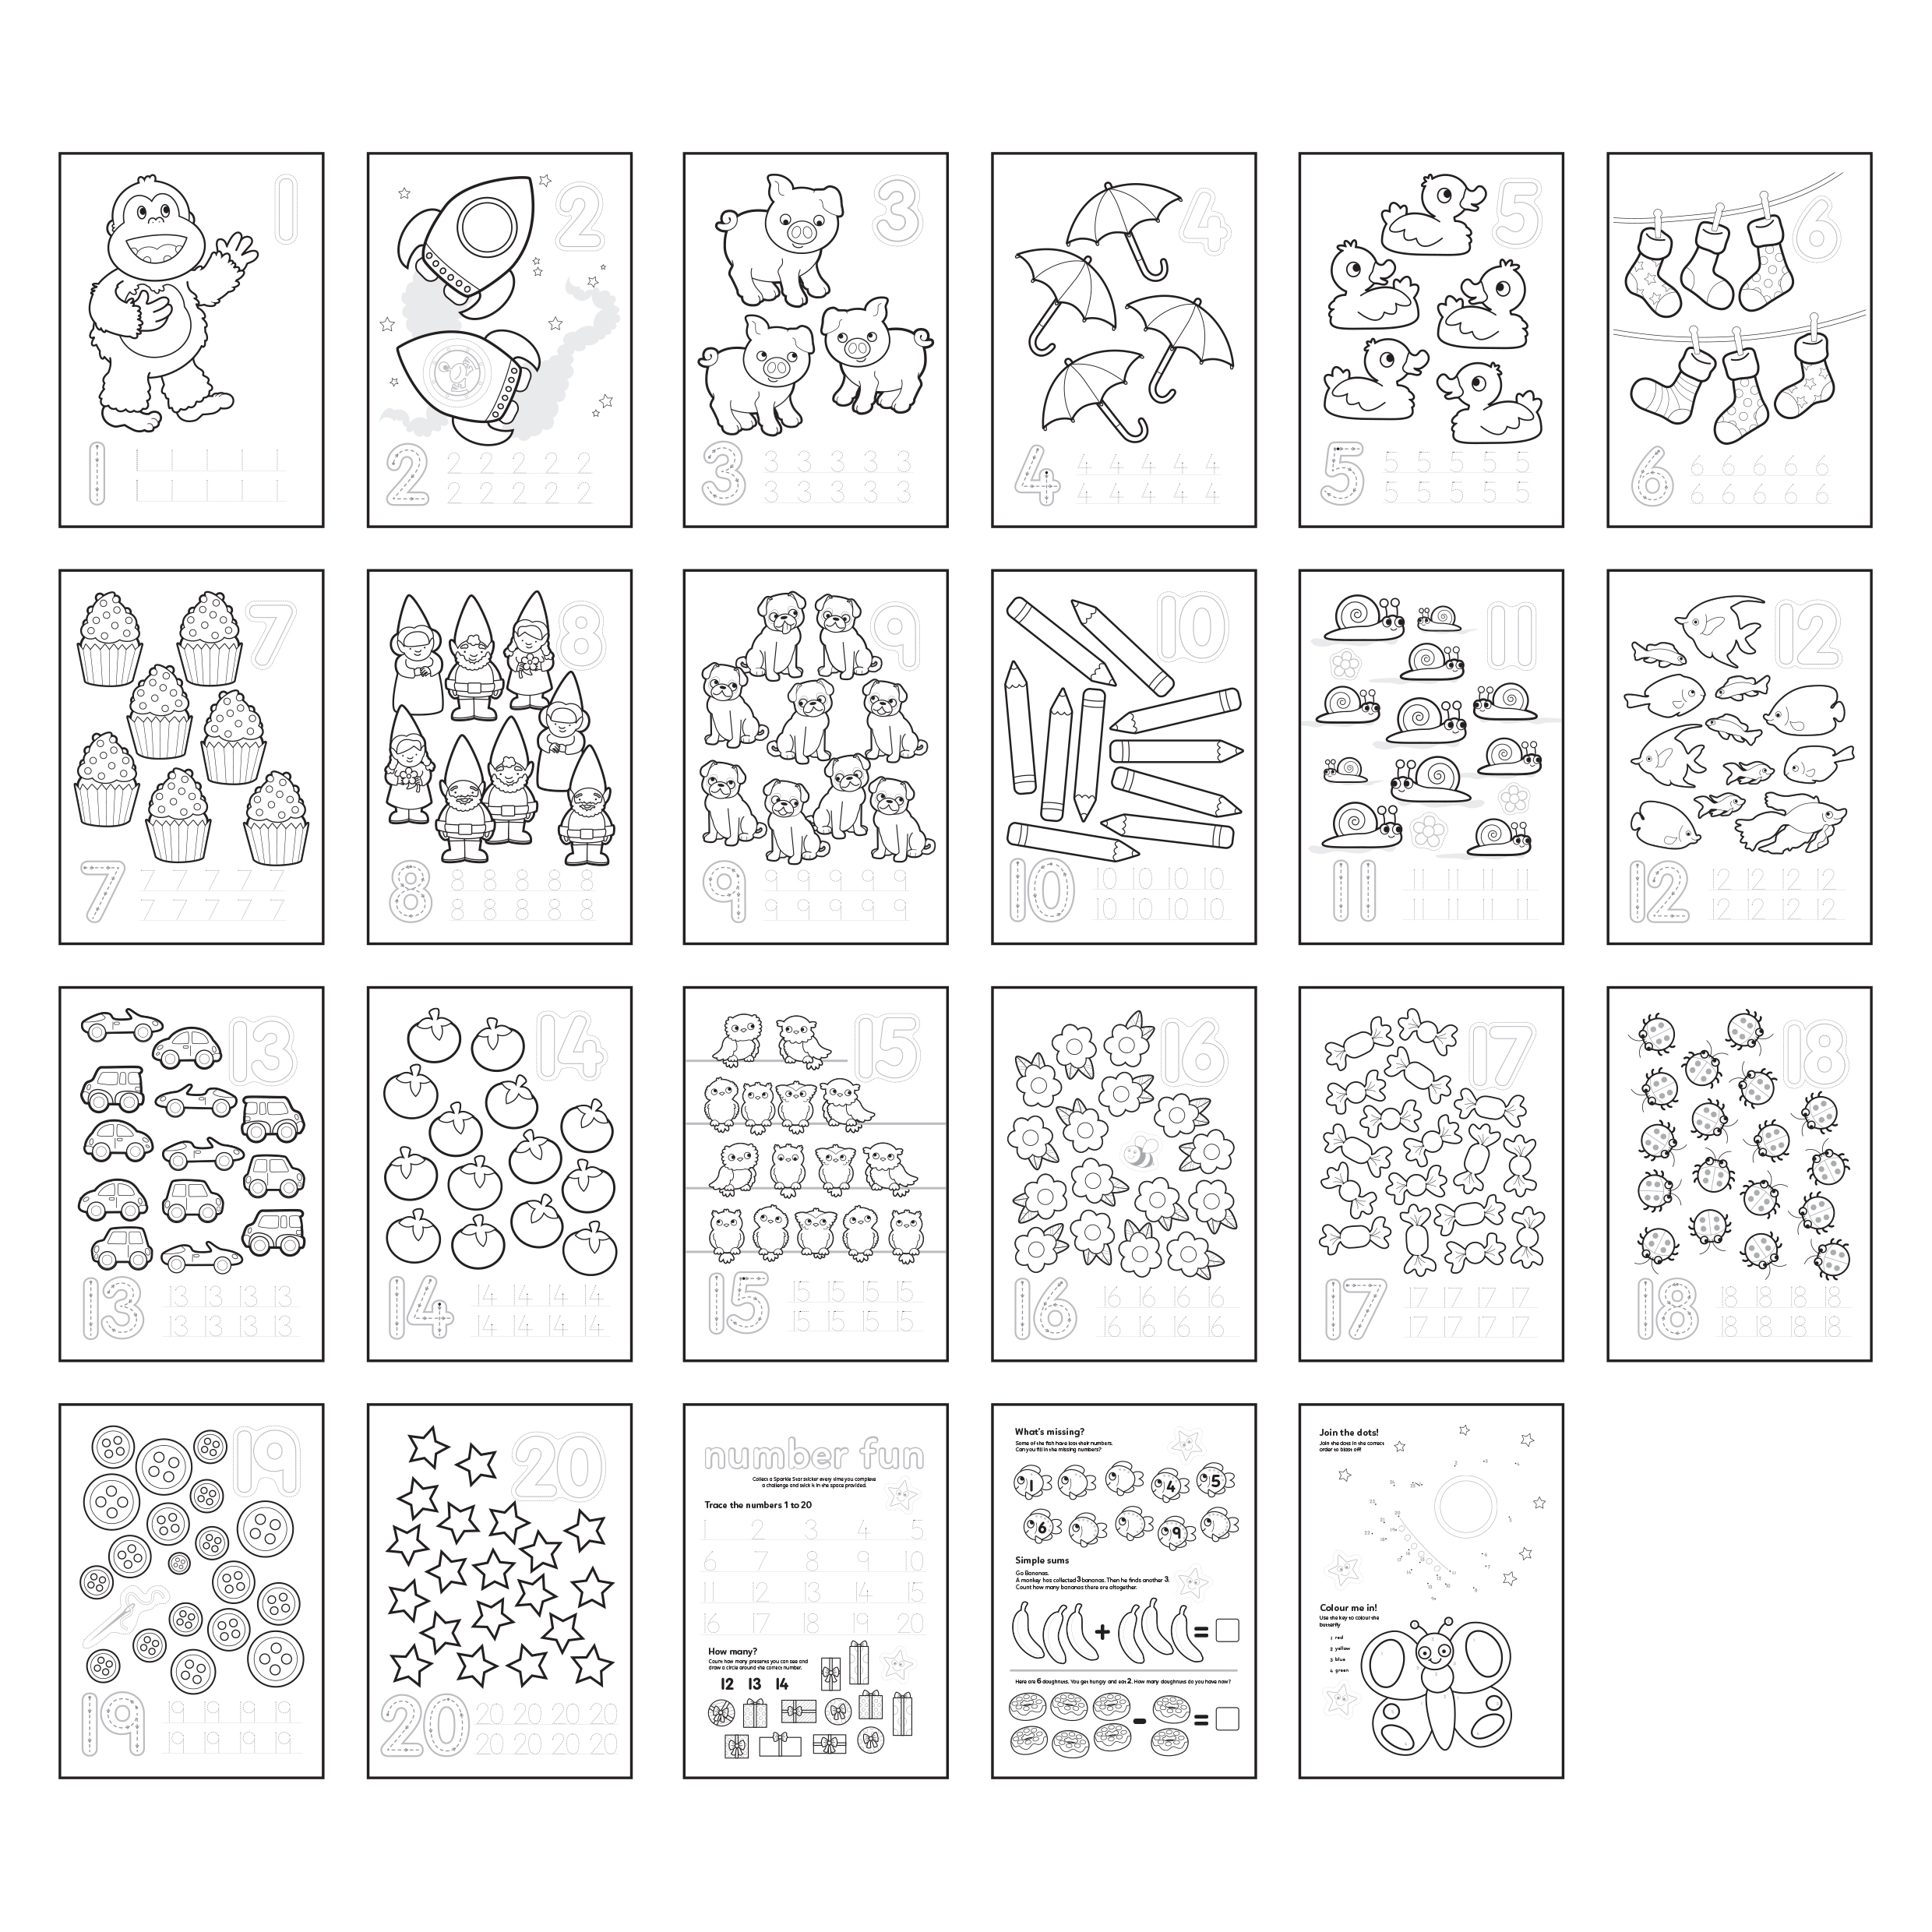 CB08 1-20 Colouring Book ALL PAGES WEB